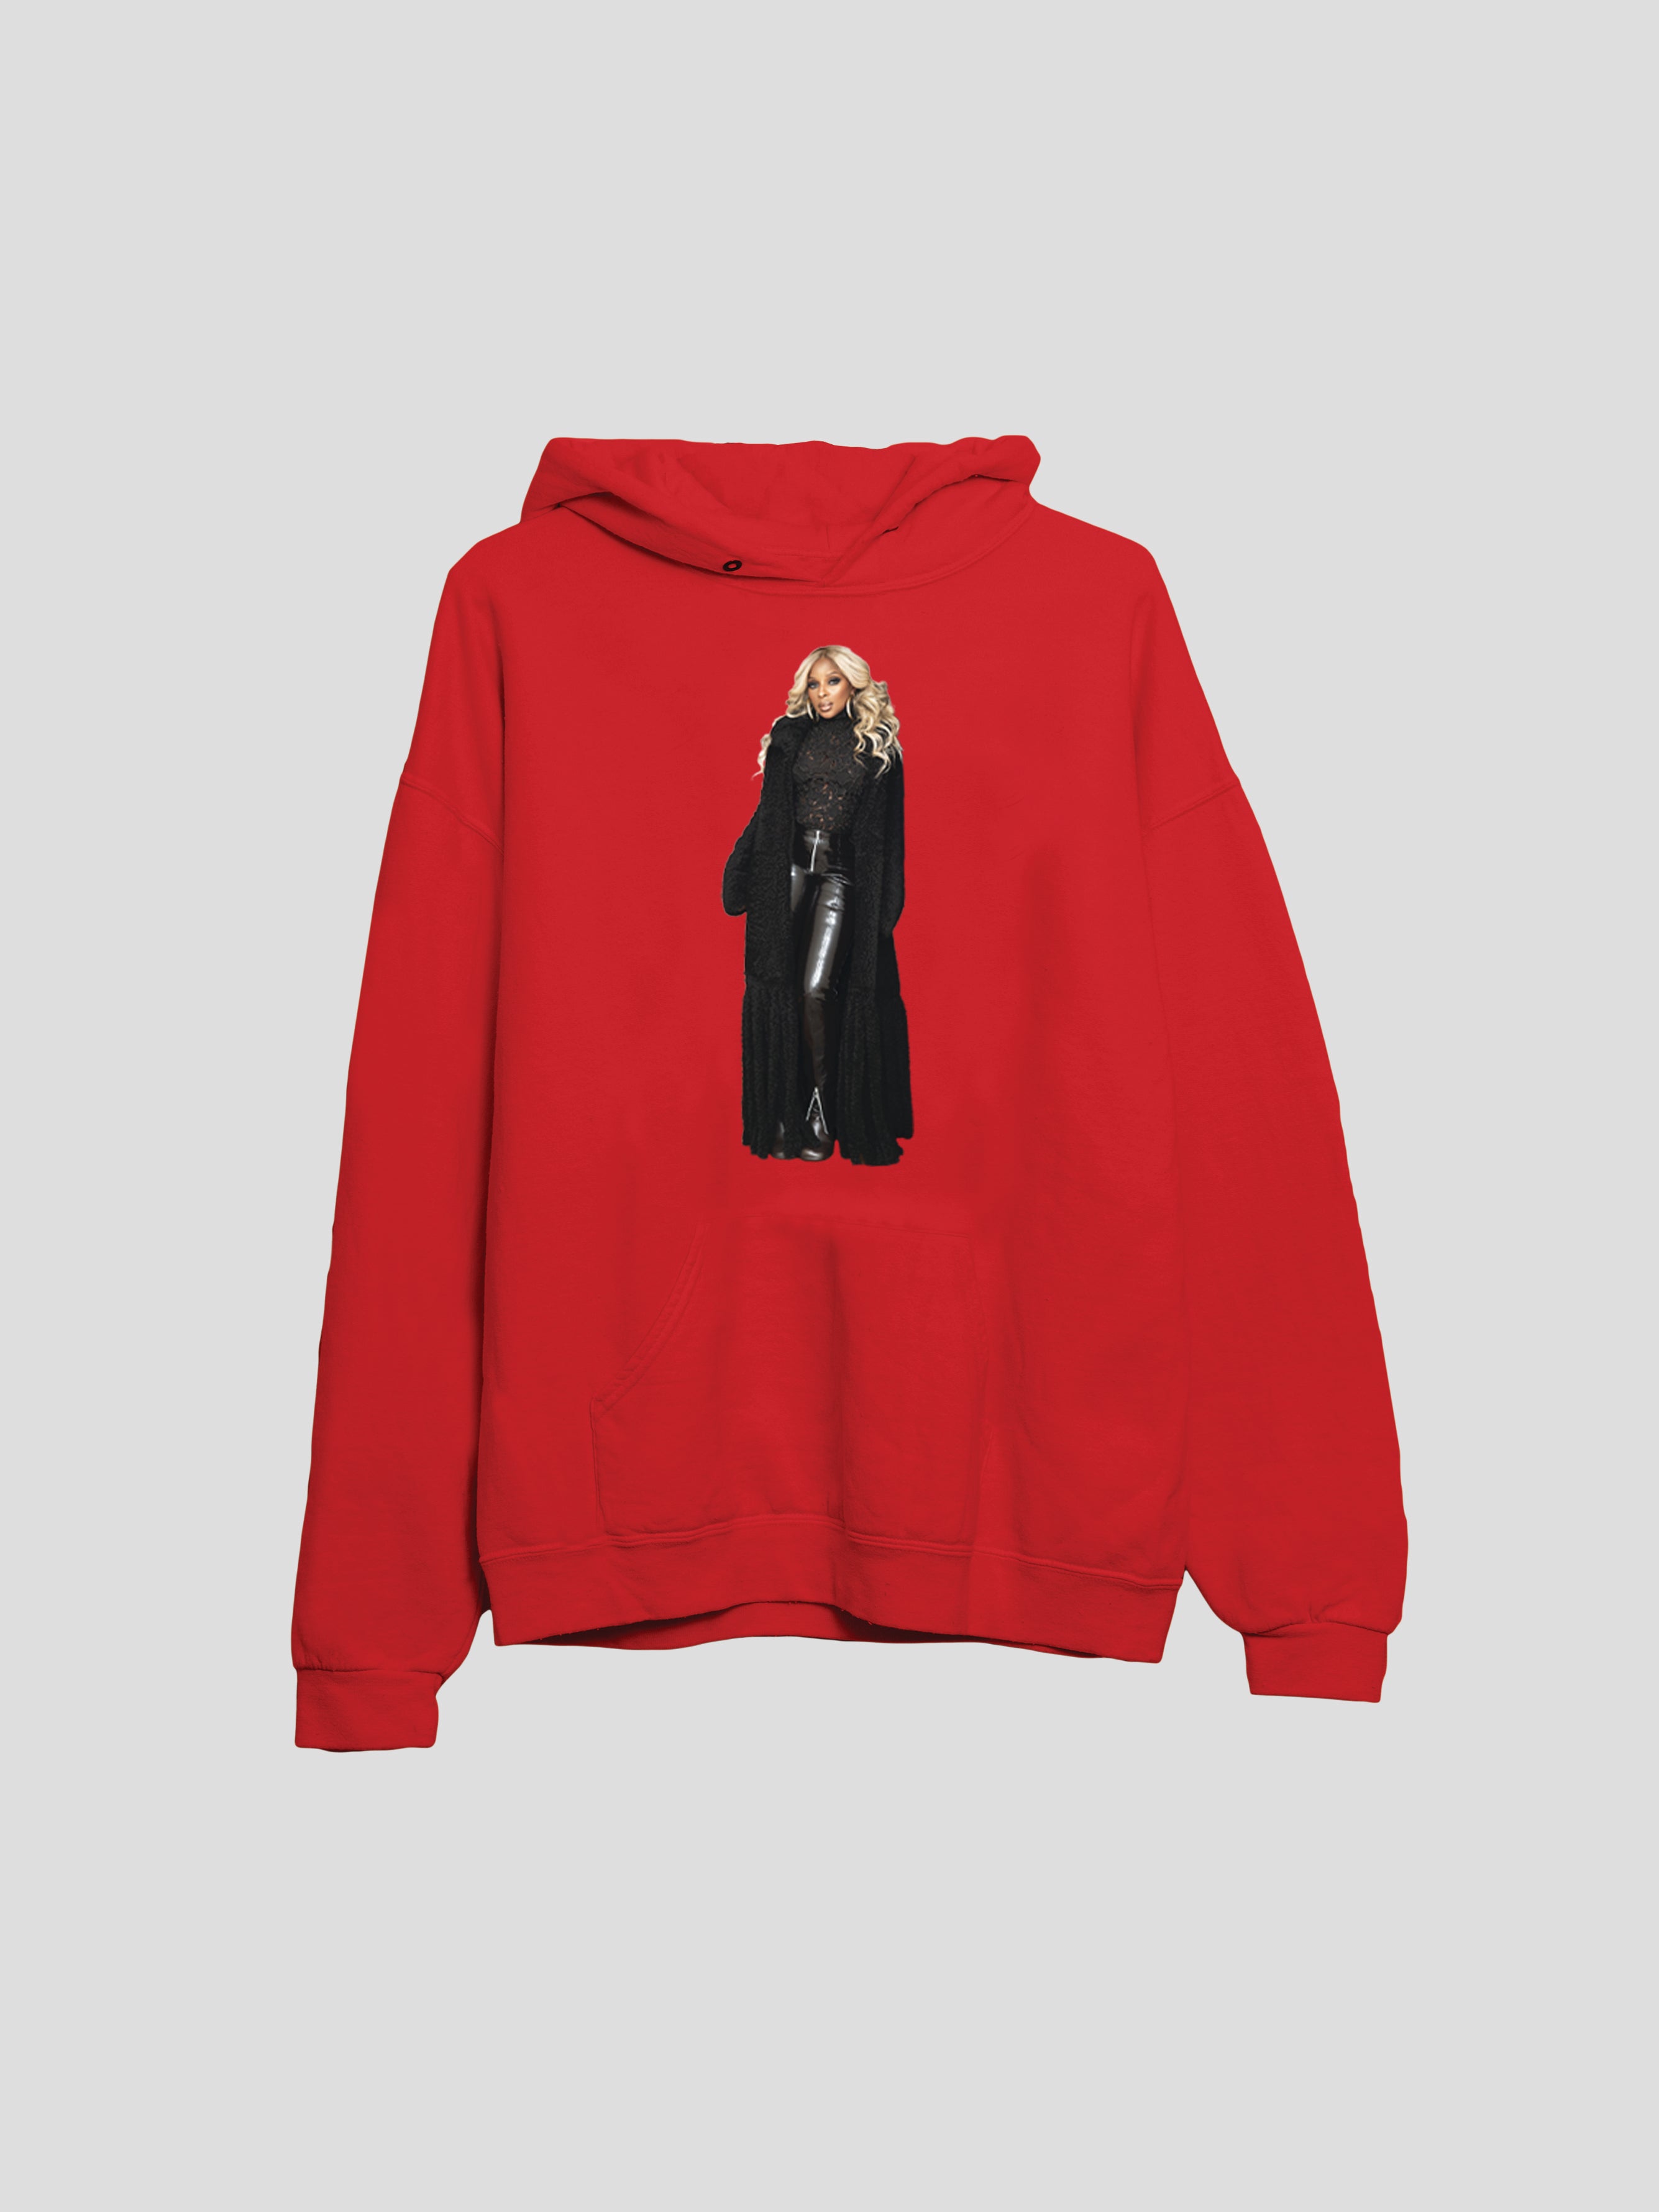 Top Red Hoodie Mary Blige Official Store